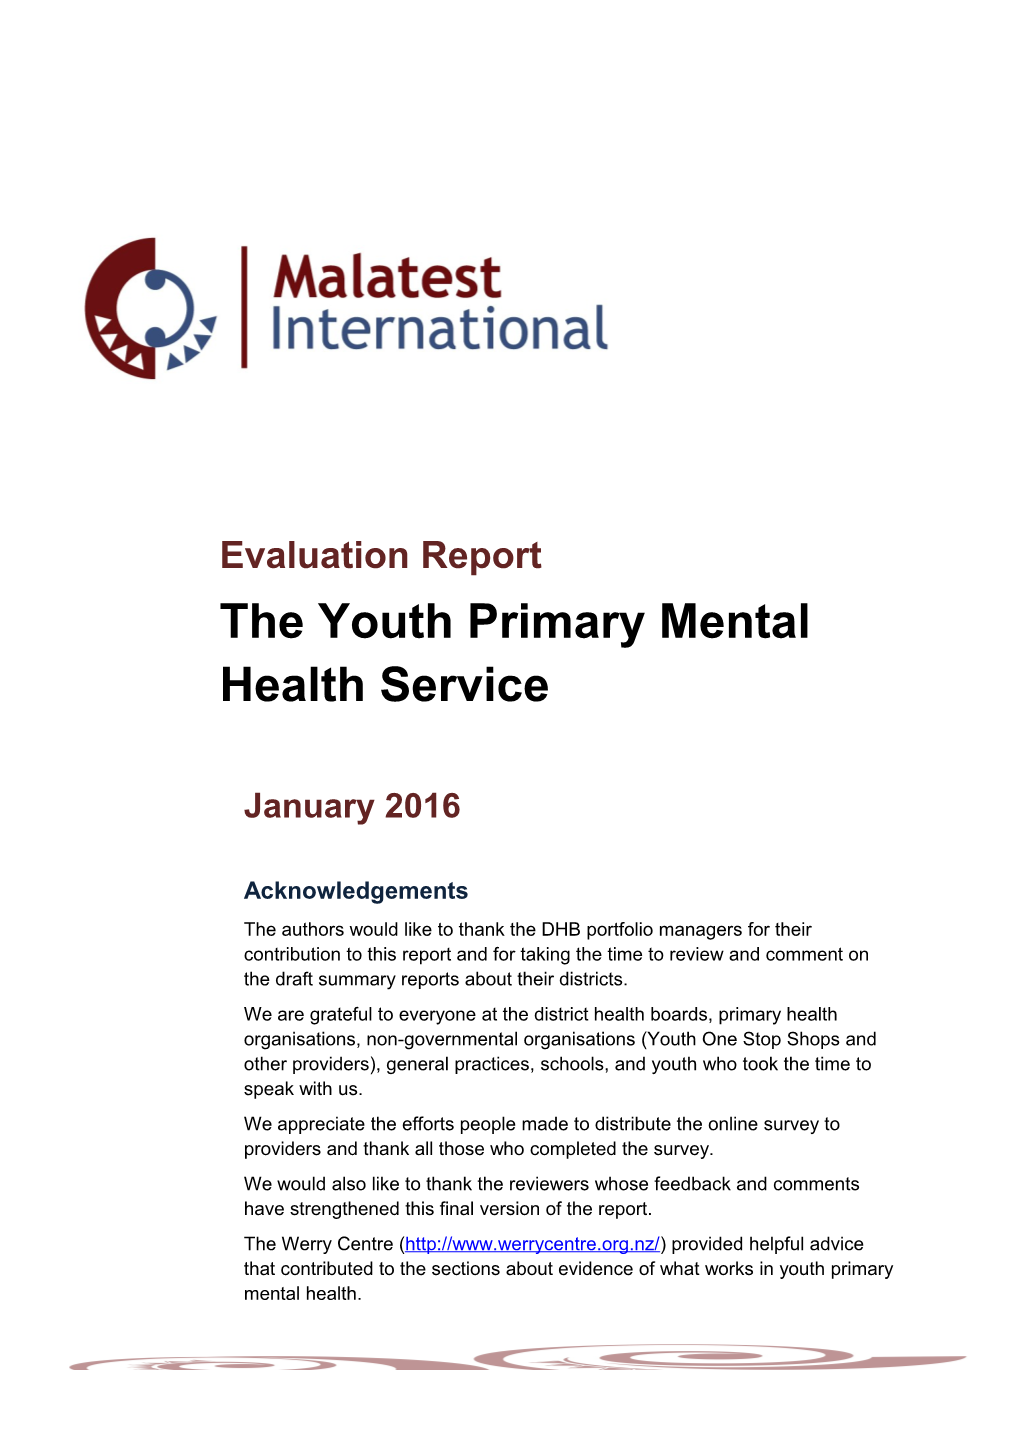 Evaluation Report: the Youth Primary Mental Health Service